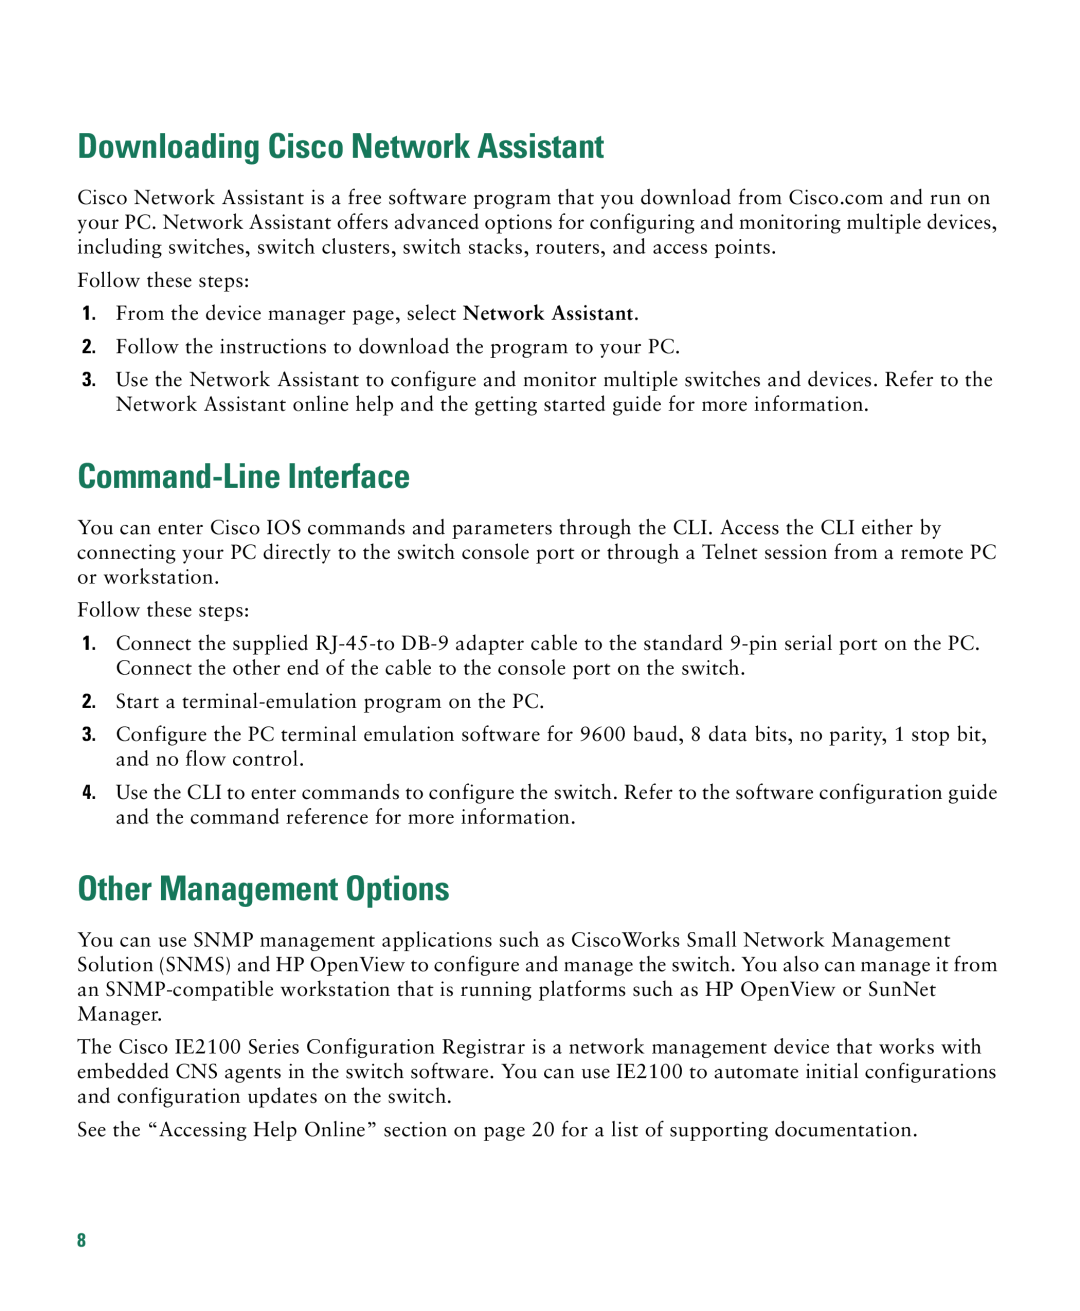 Cisco Systems CATALYST 2950 manual Downloading Cisco Network Assistant, Command-Line Interface, Other Management Options 